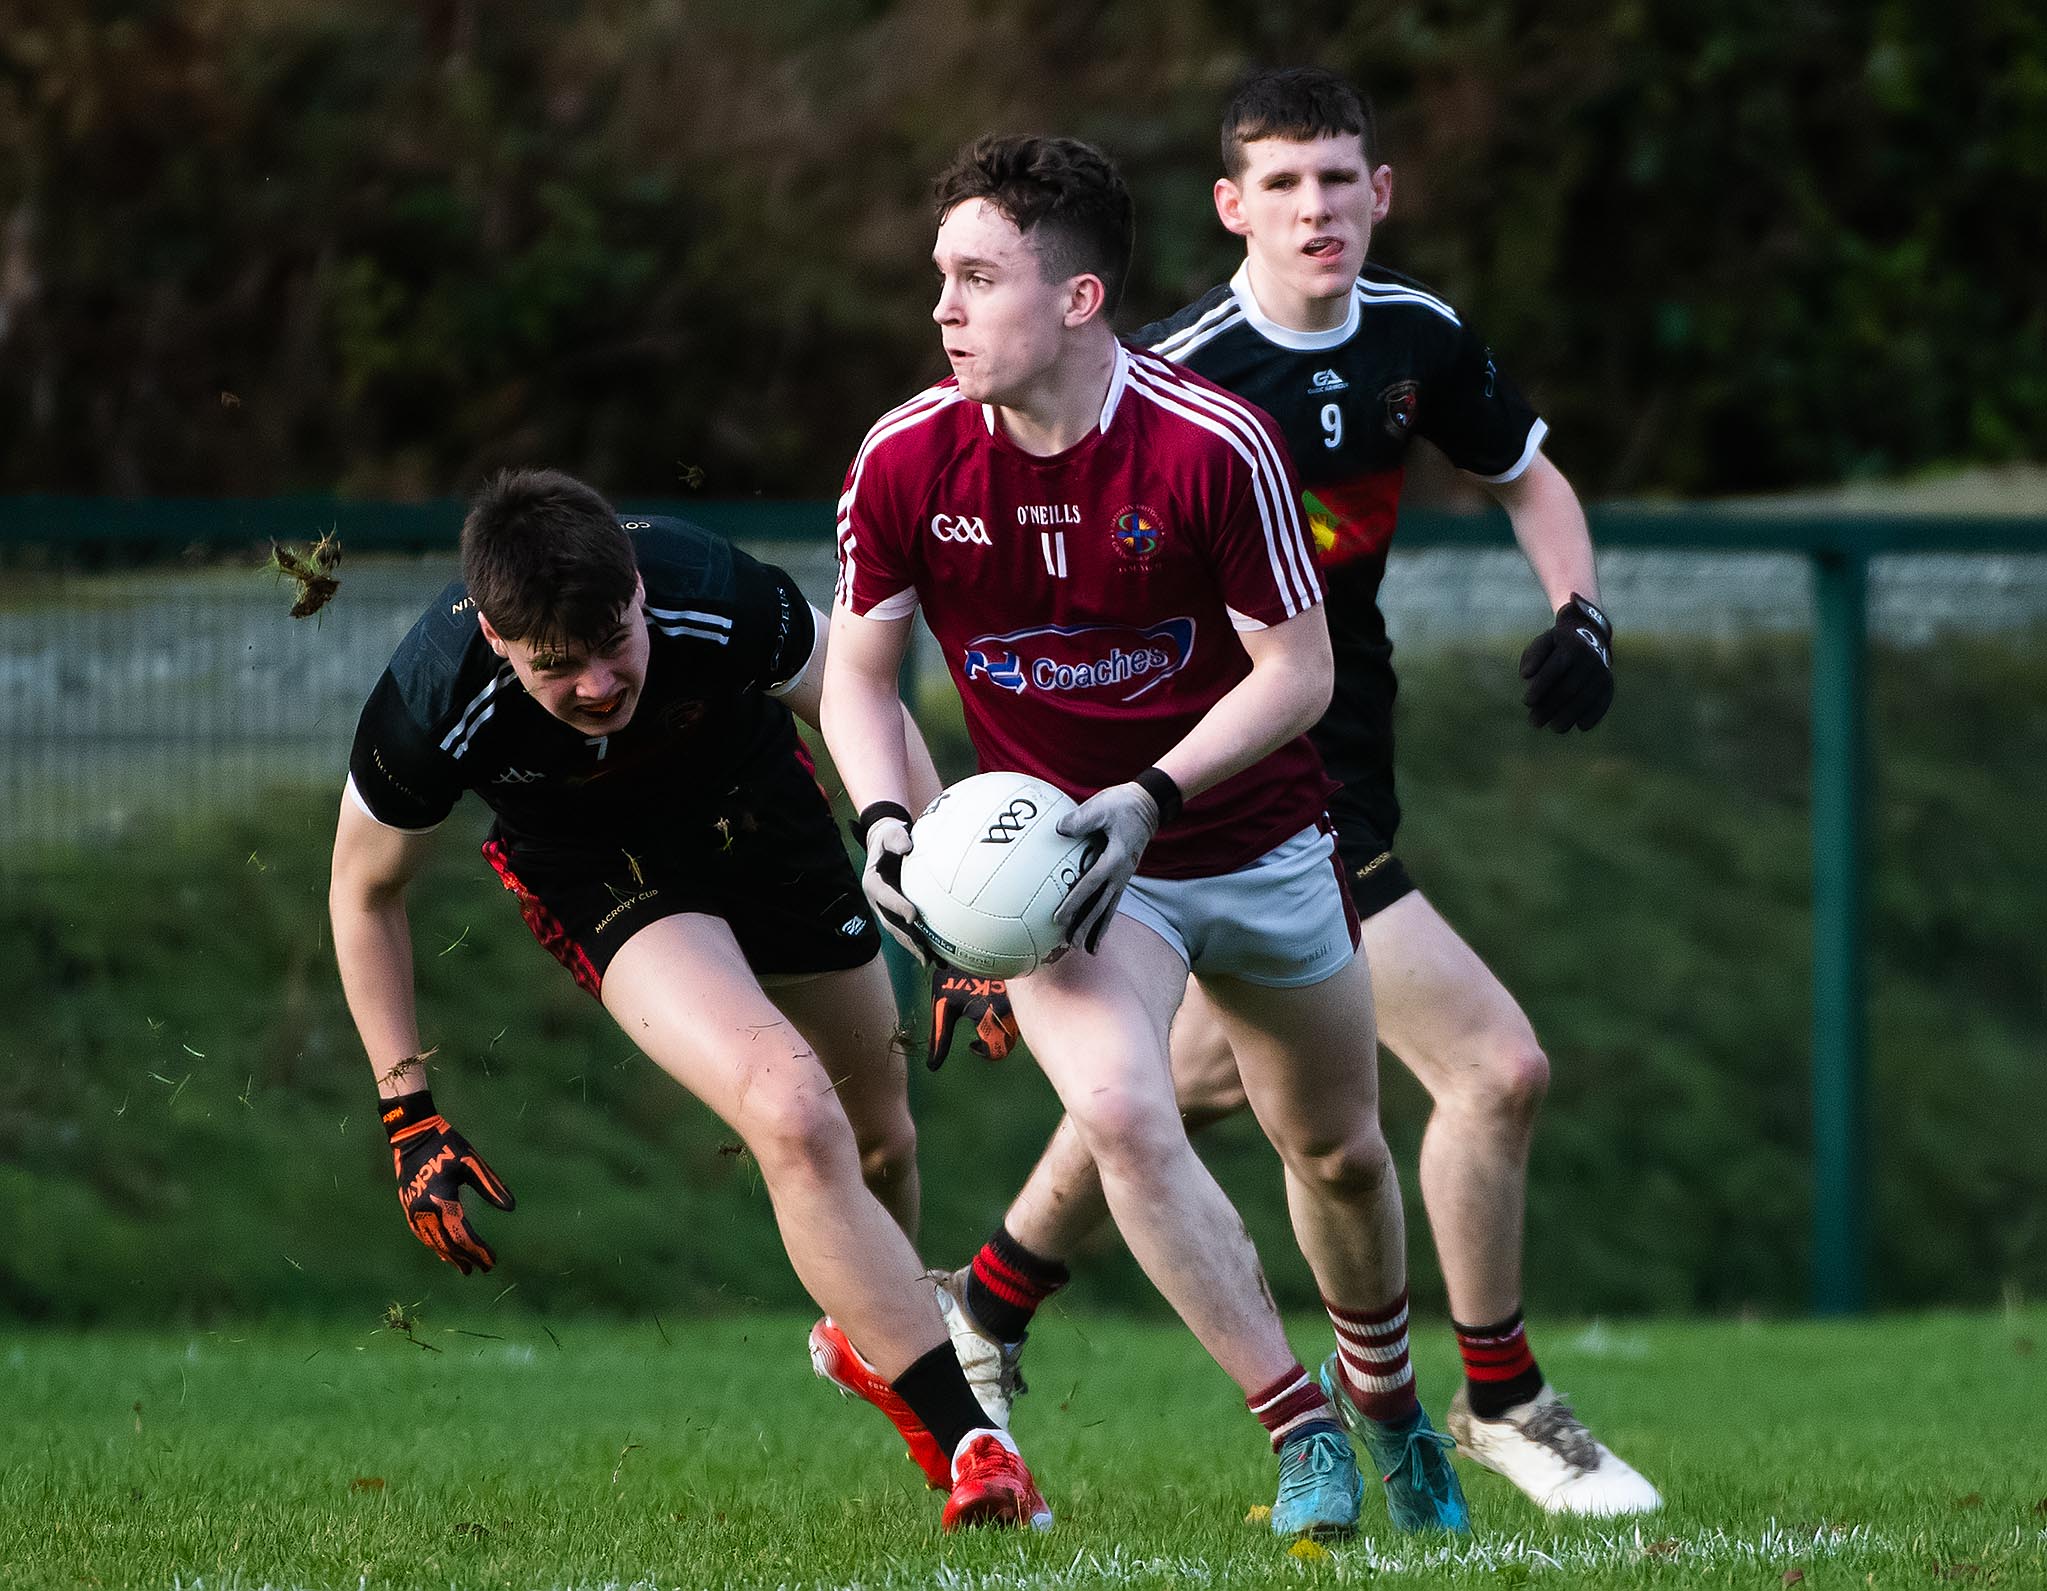 Omagh CBS coast past Letterkenny in MacRory Cup